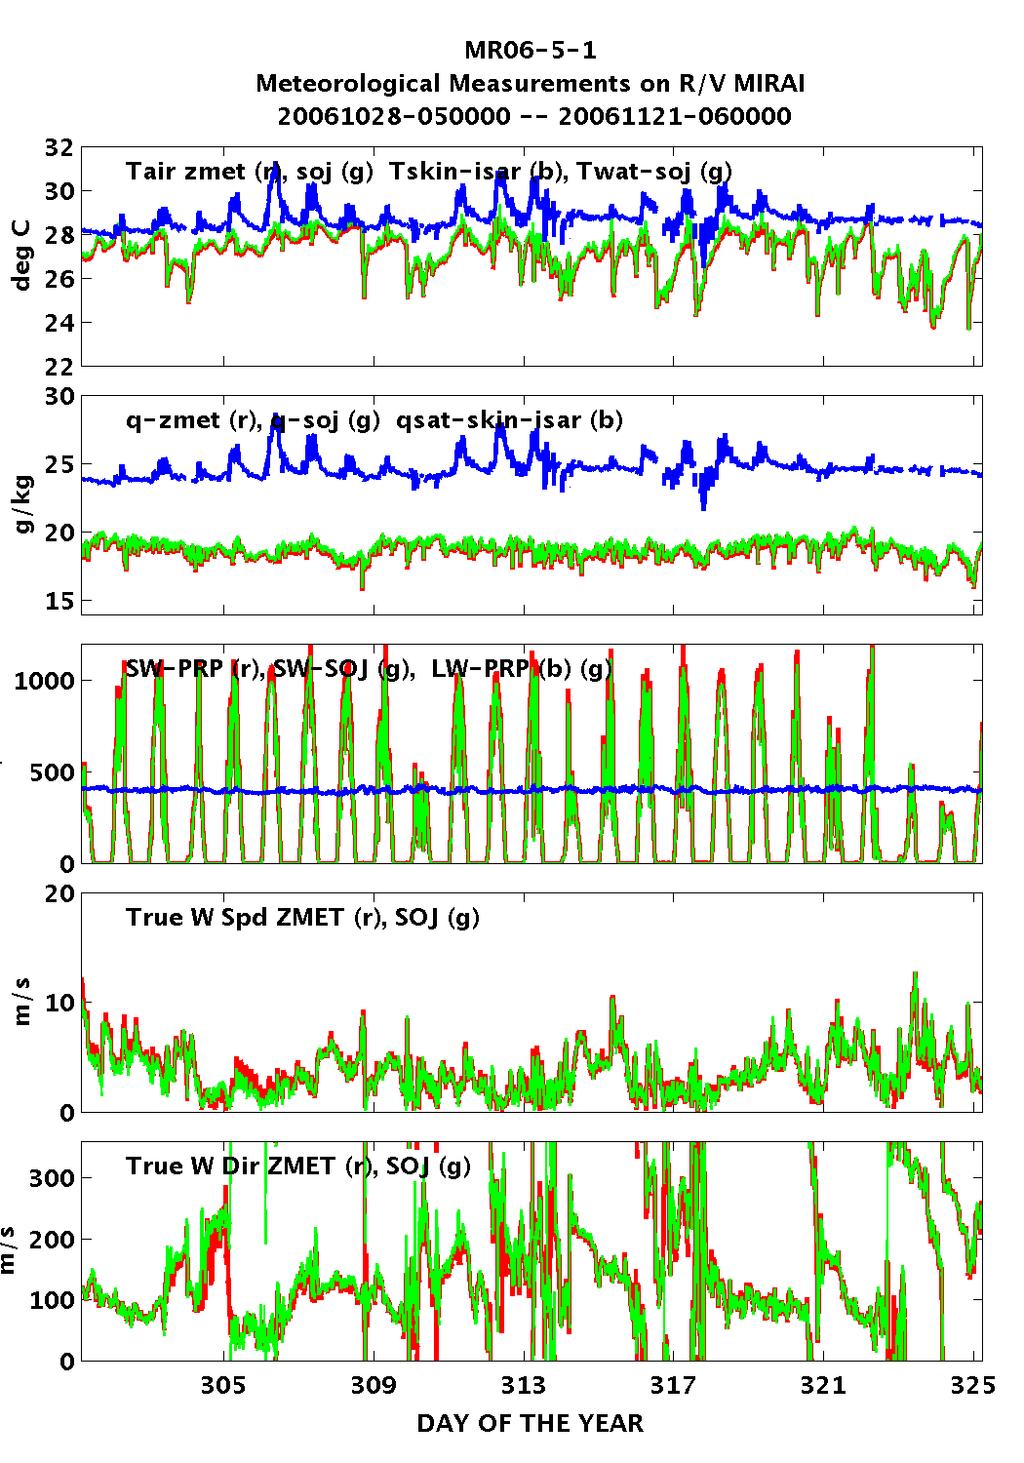 Figure 3. Summary of meteorological observations during the intensive observation period.